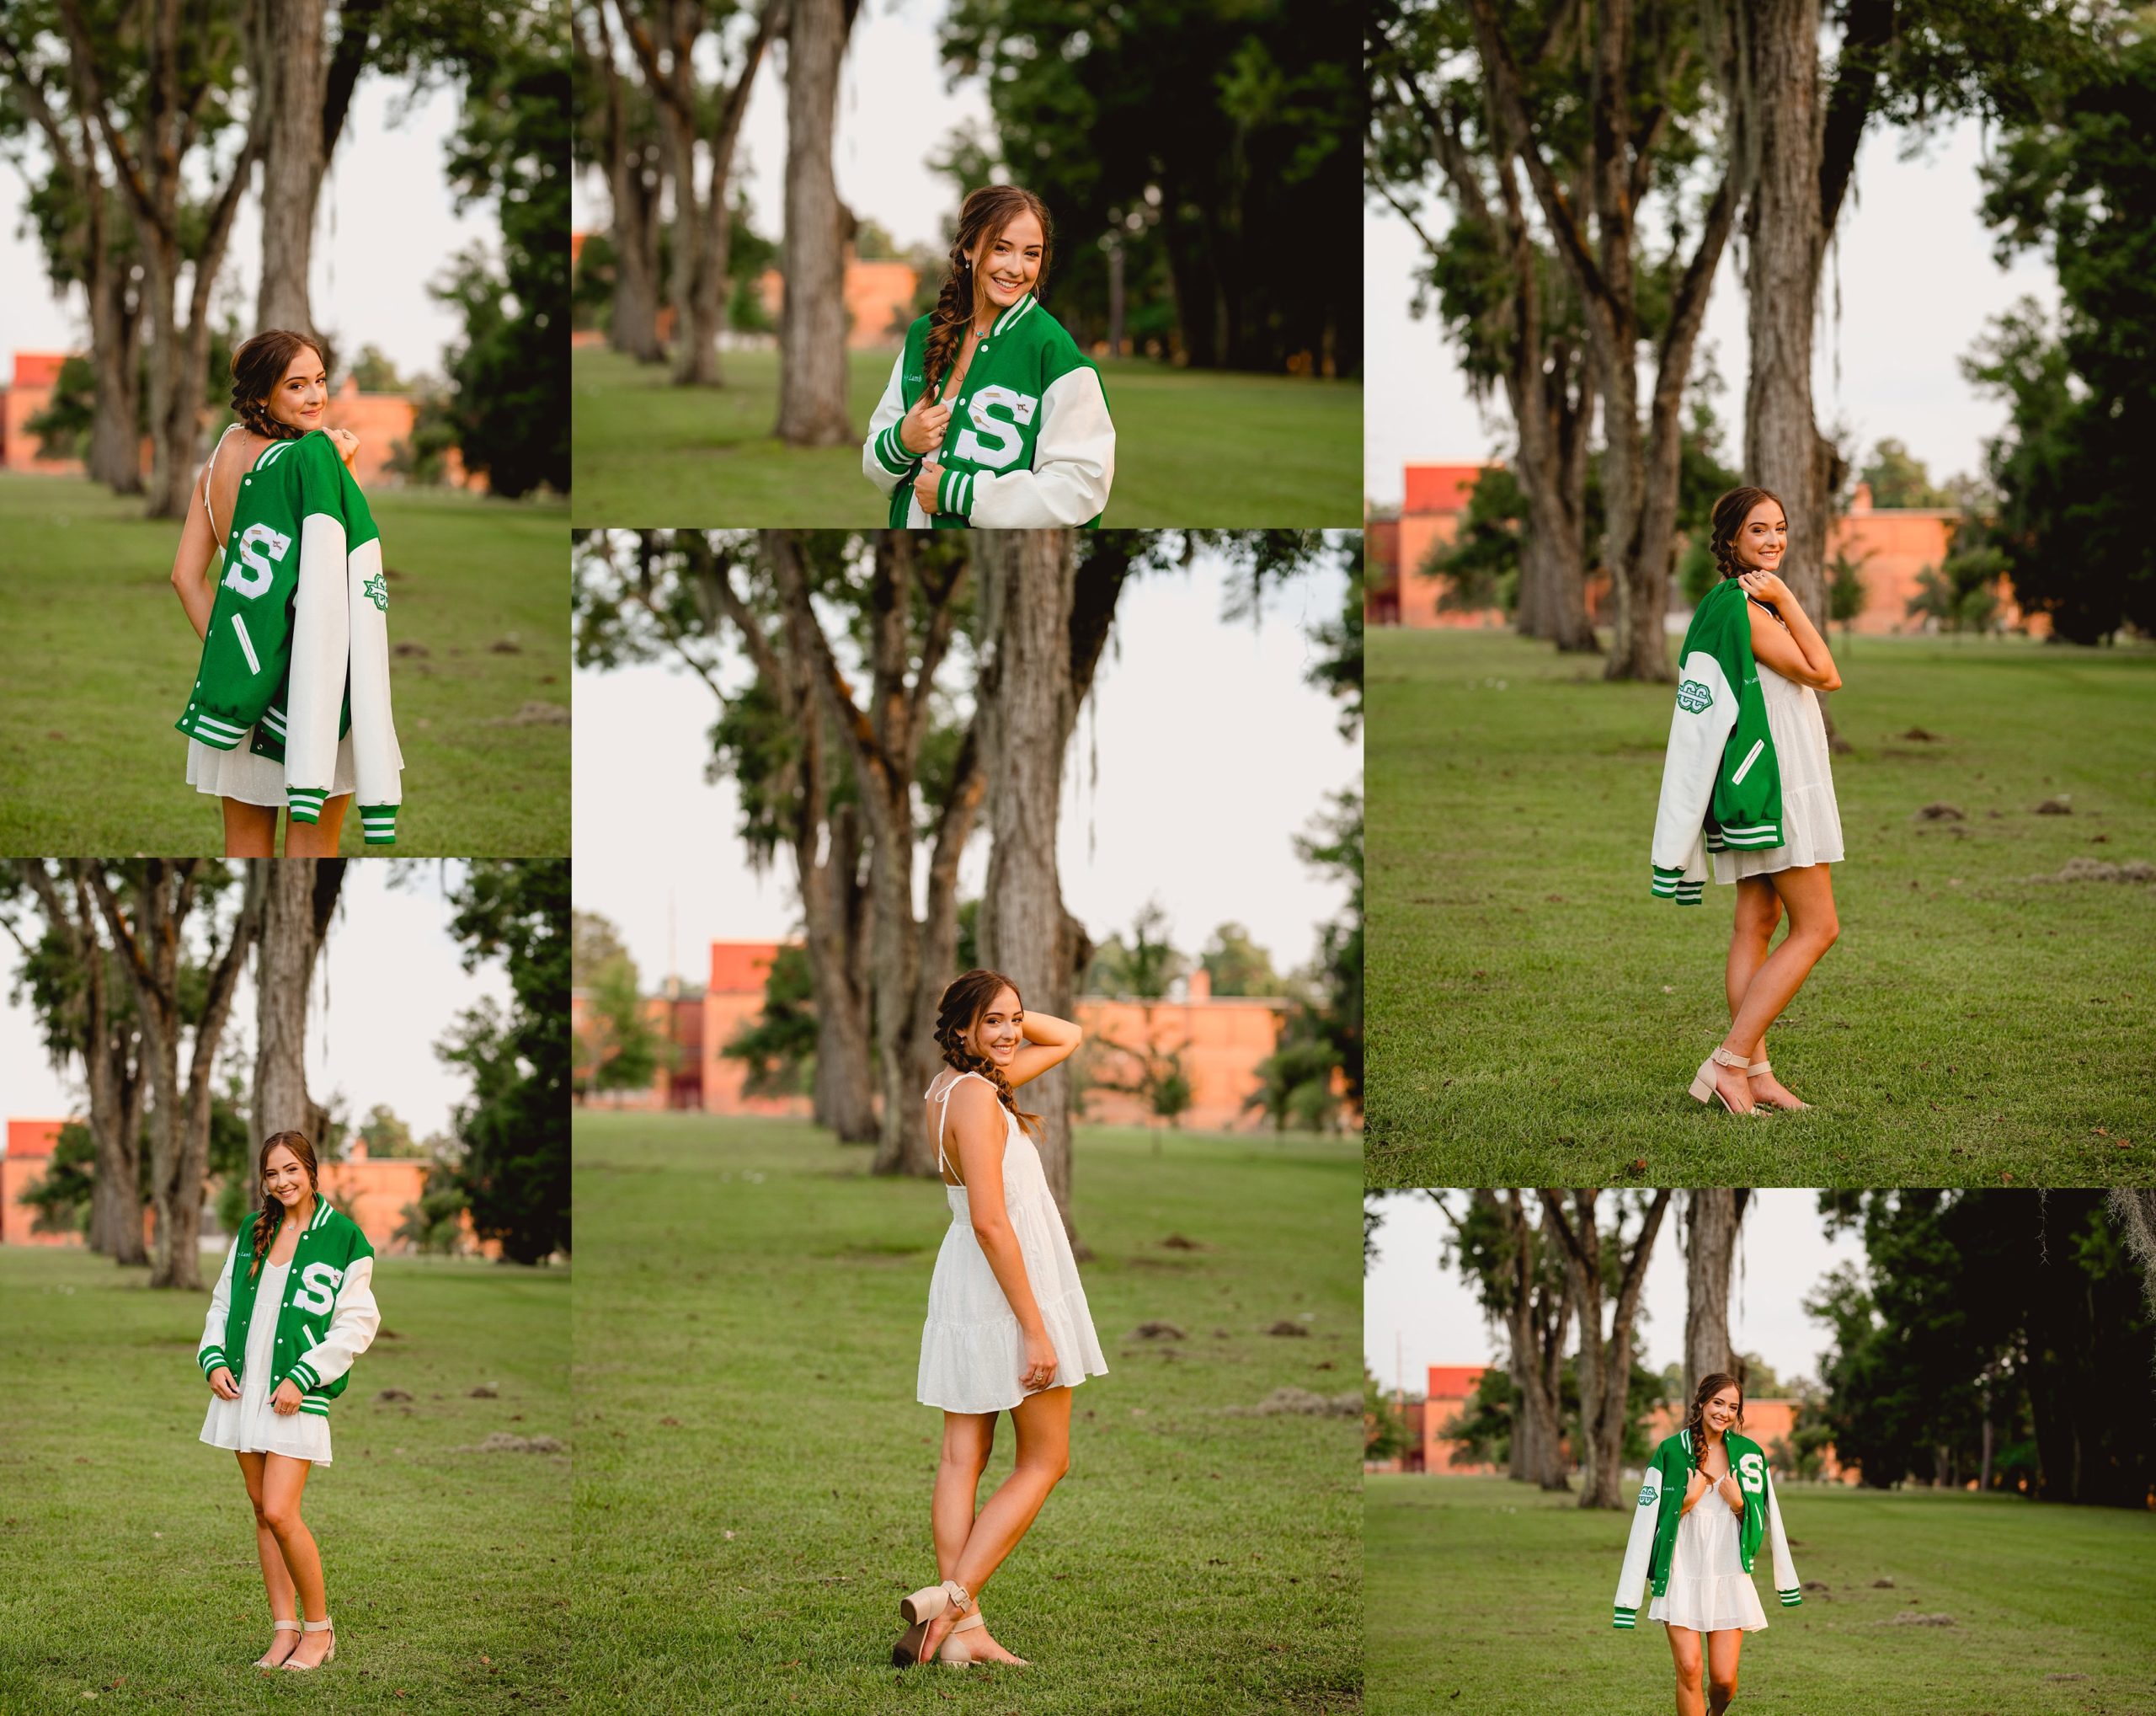 Senior picture ideas with letterman jacket for a girl.